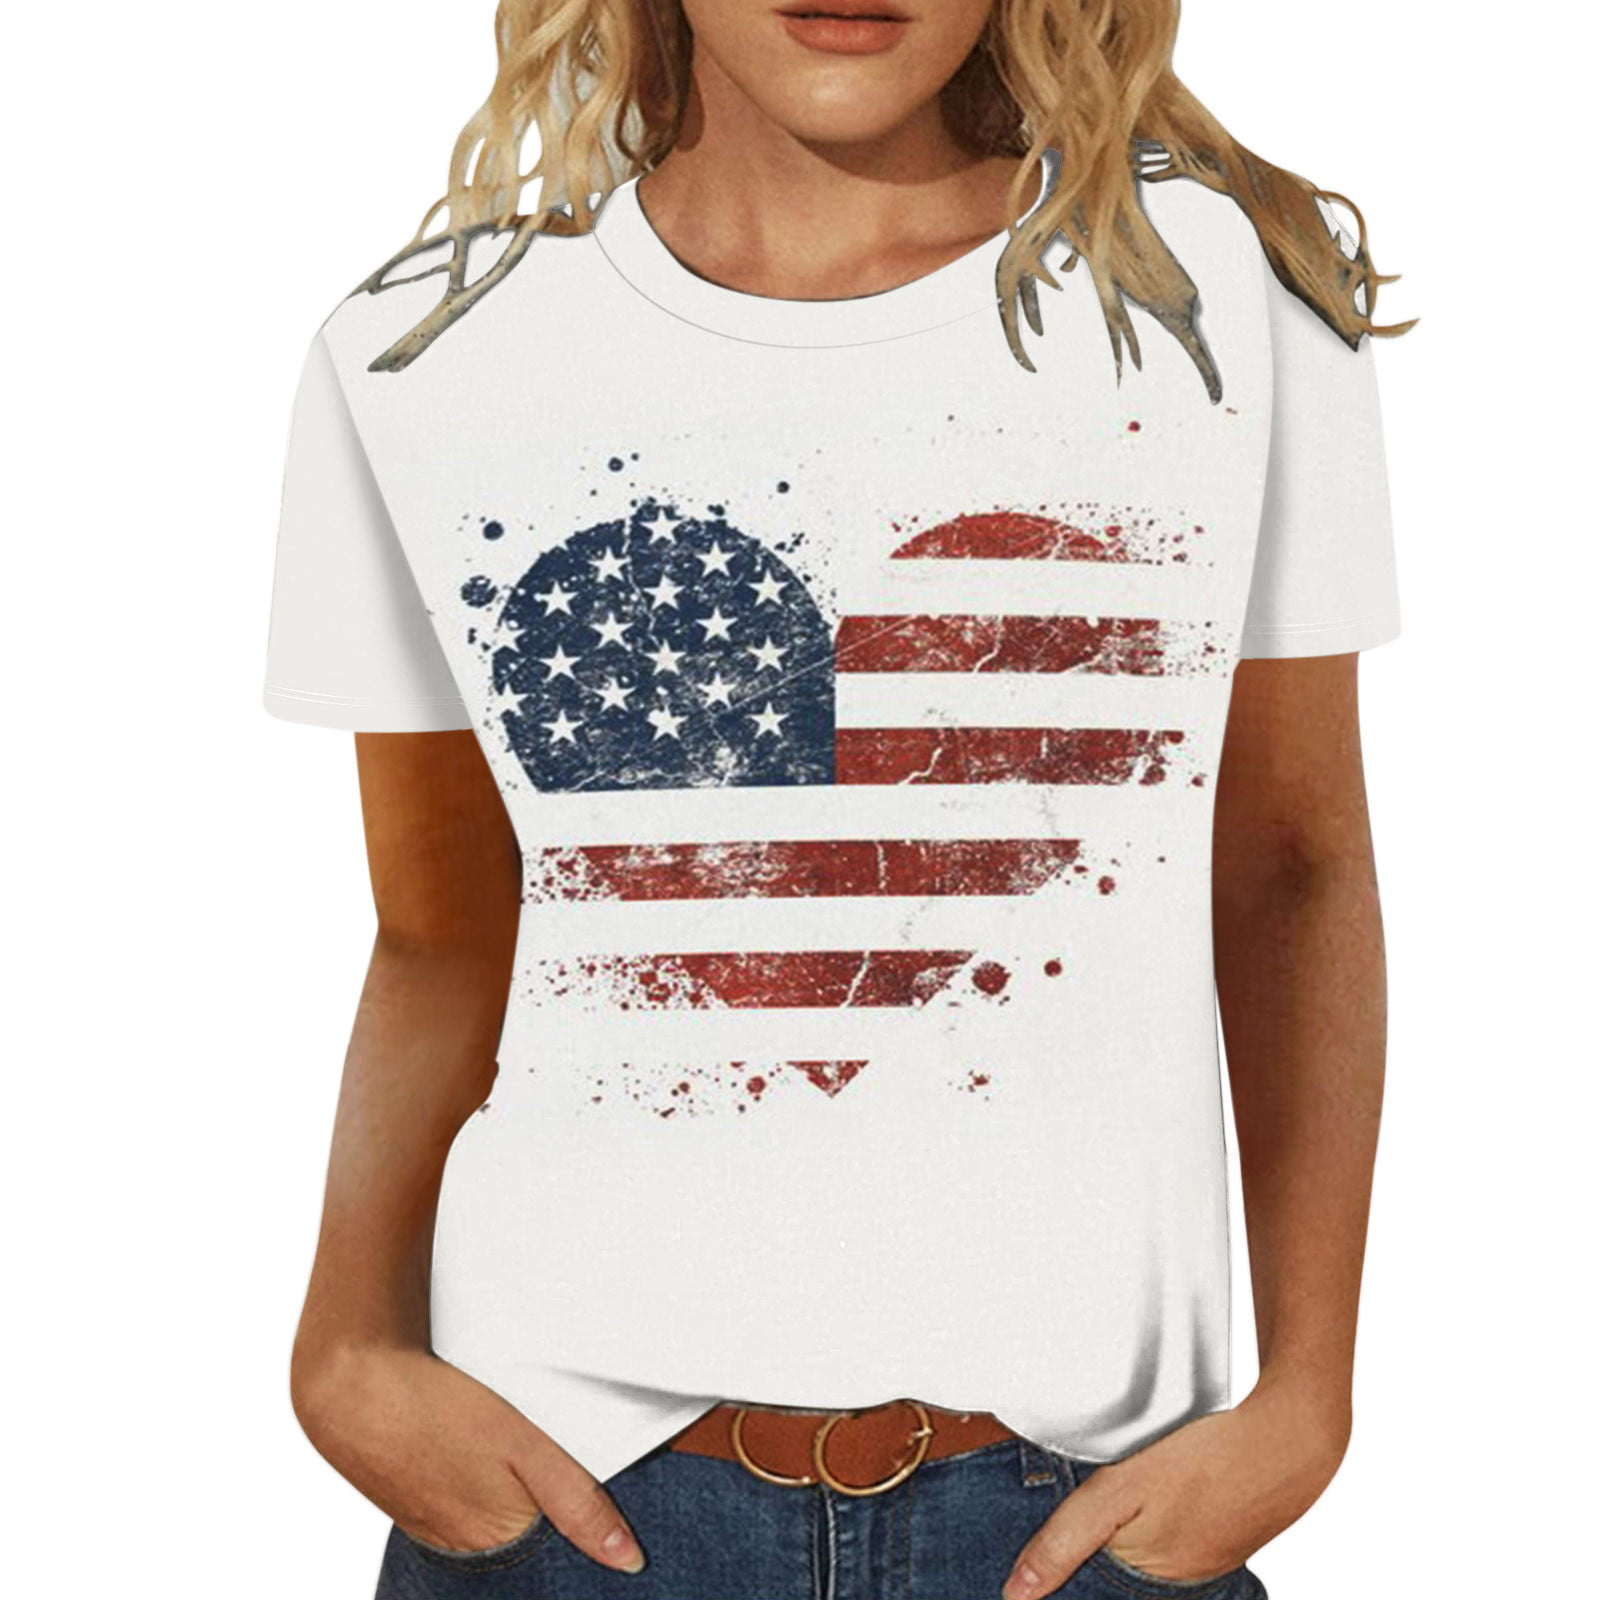 Womens Summer Tops 4th of July Short Sleeve Shirts for Women Button Side Tunic Round Neck Loose Tunic T Shirt Tops 